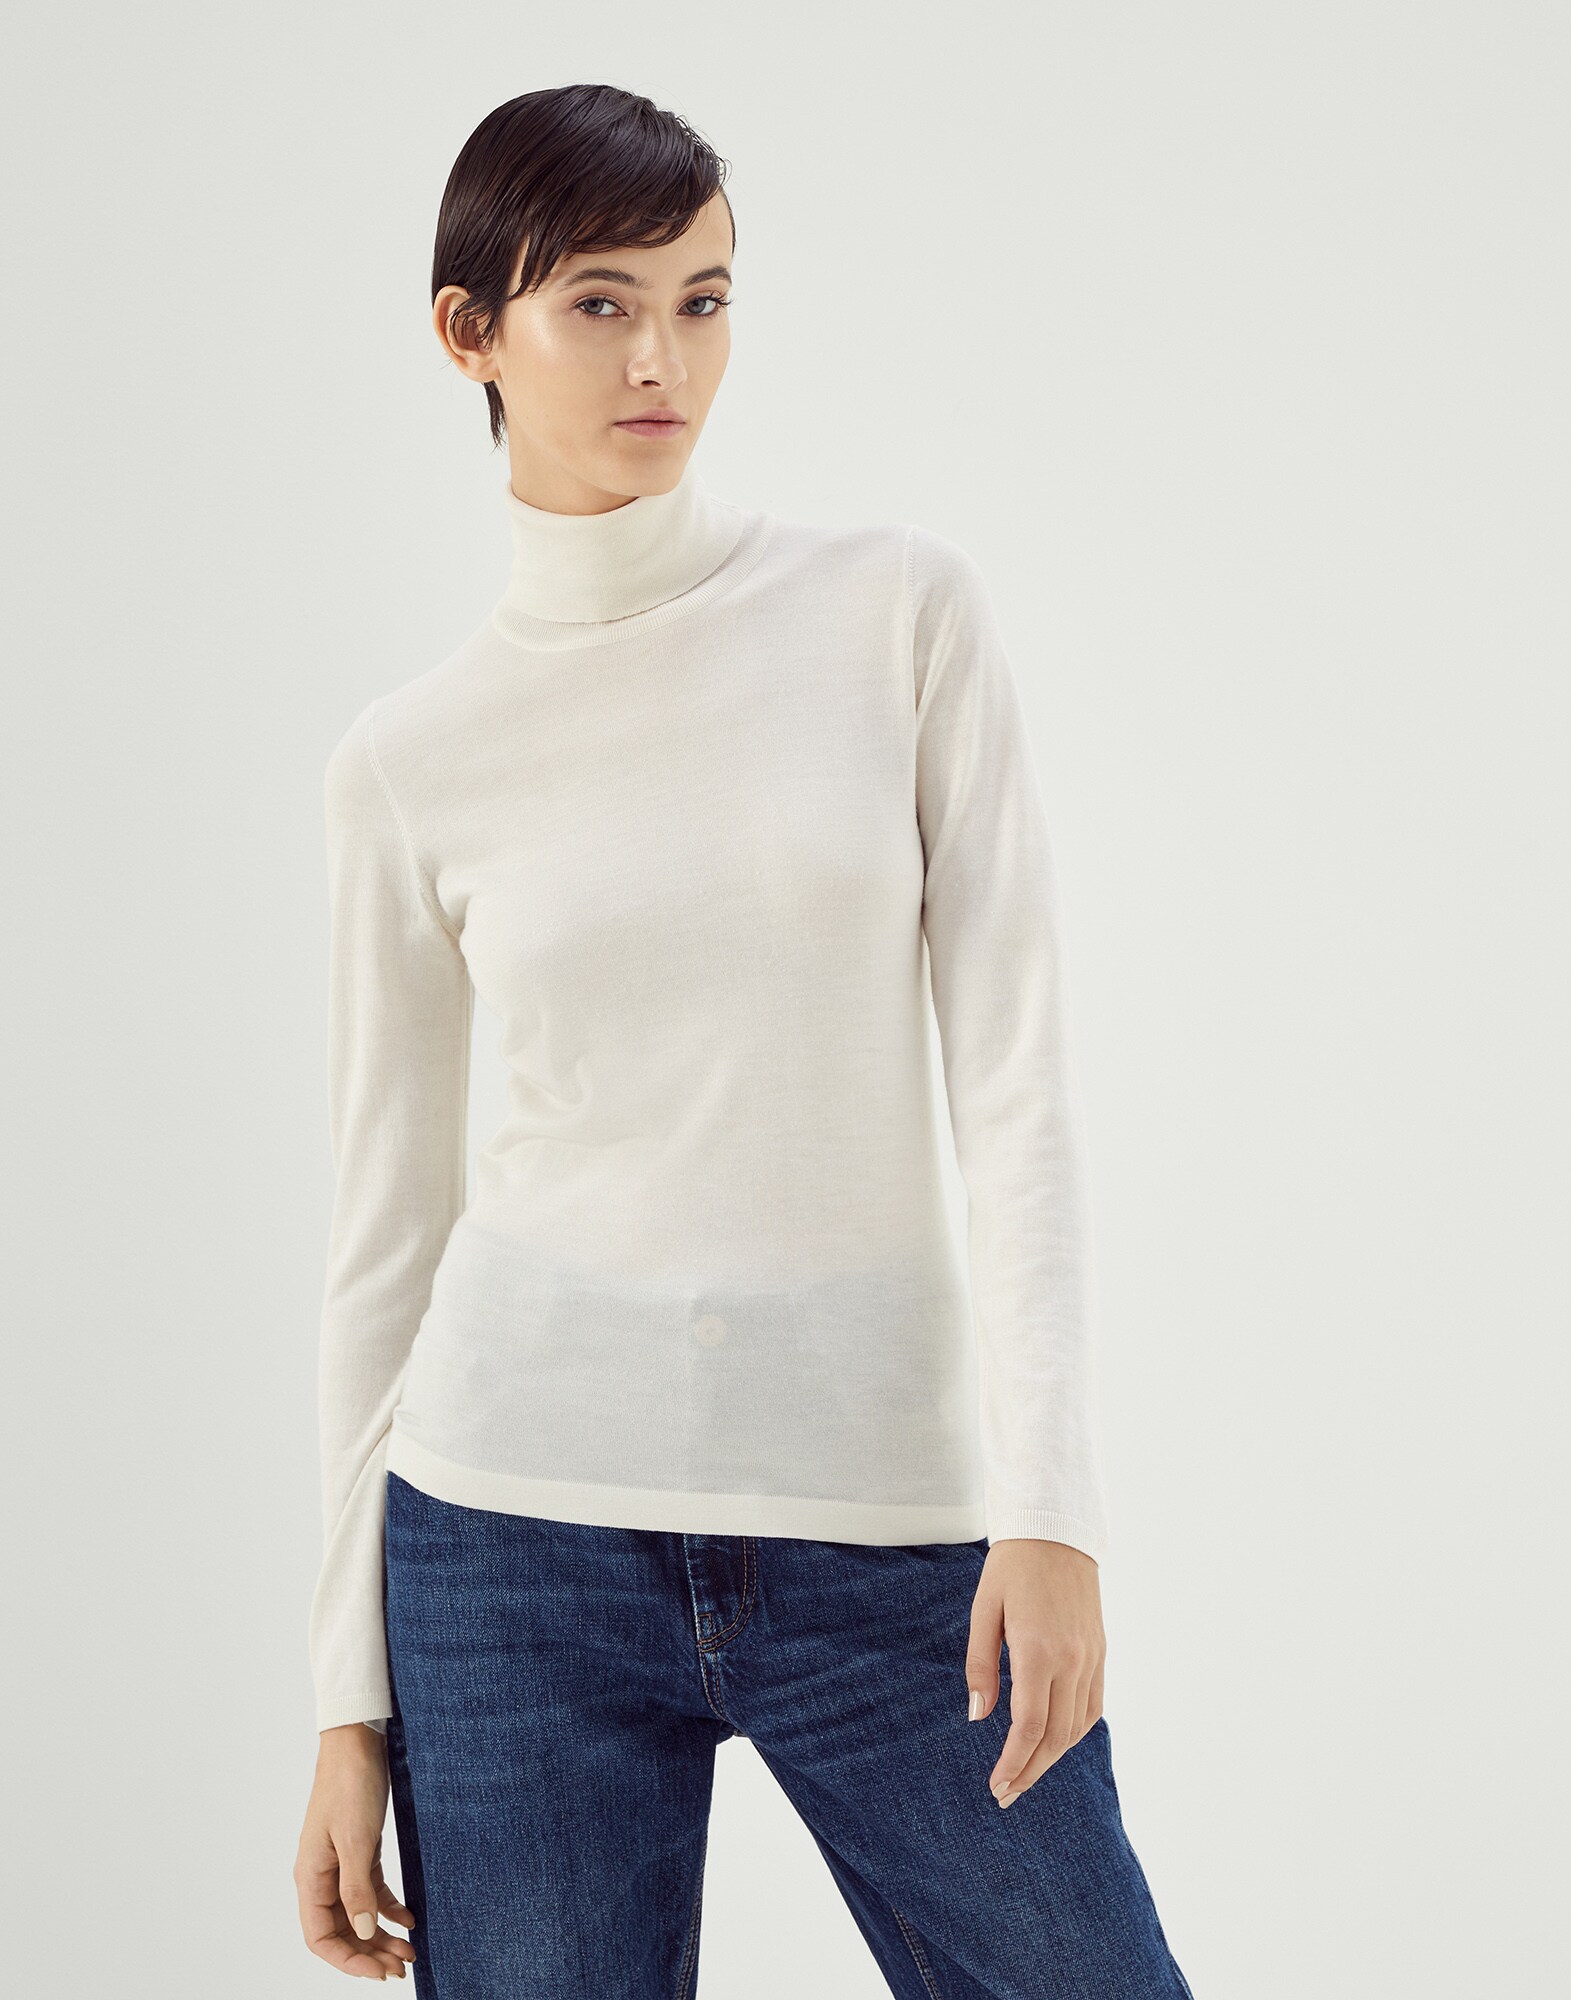 Cashmere and silk sweater